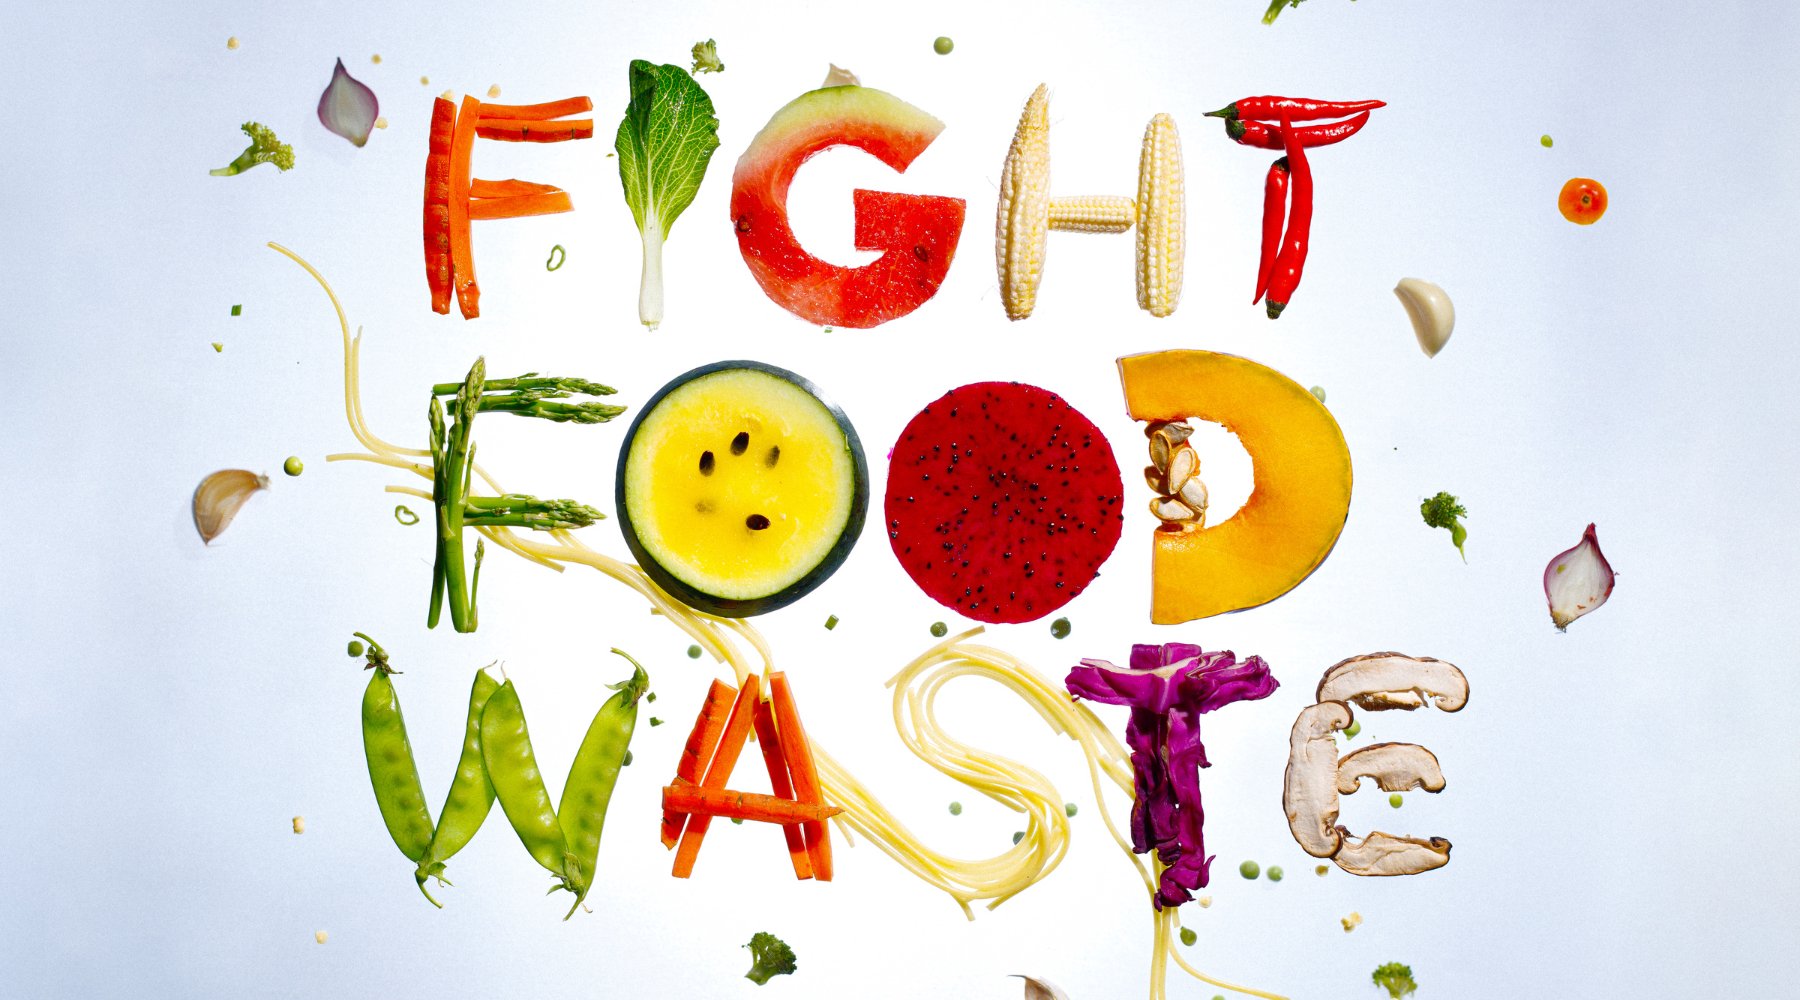 Food Waste: Let's Make It a Zero-Party Zone! - Get Earthy